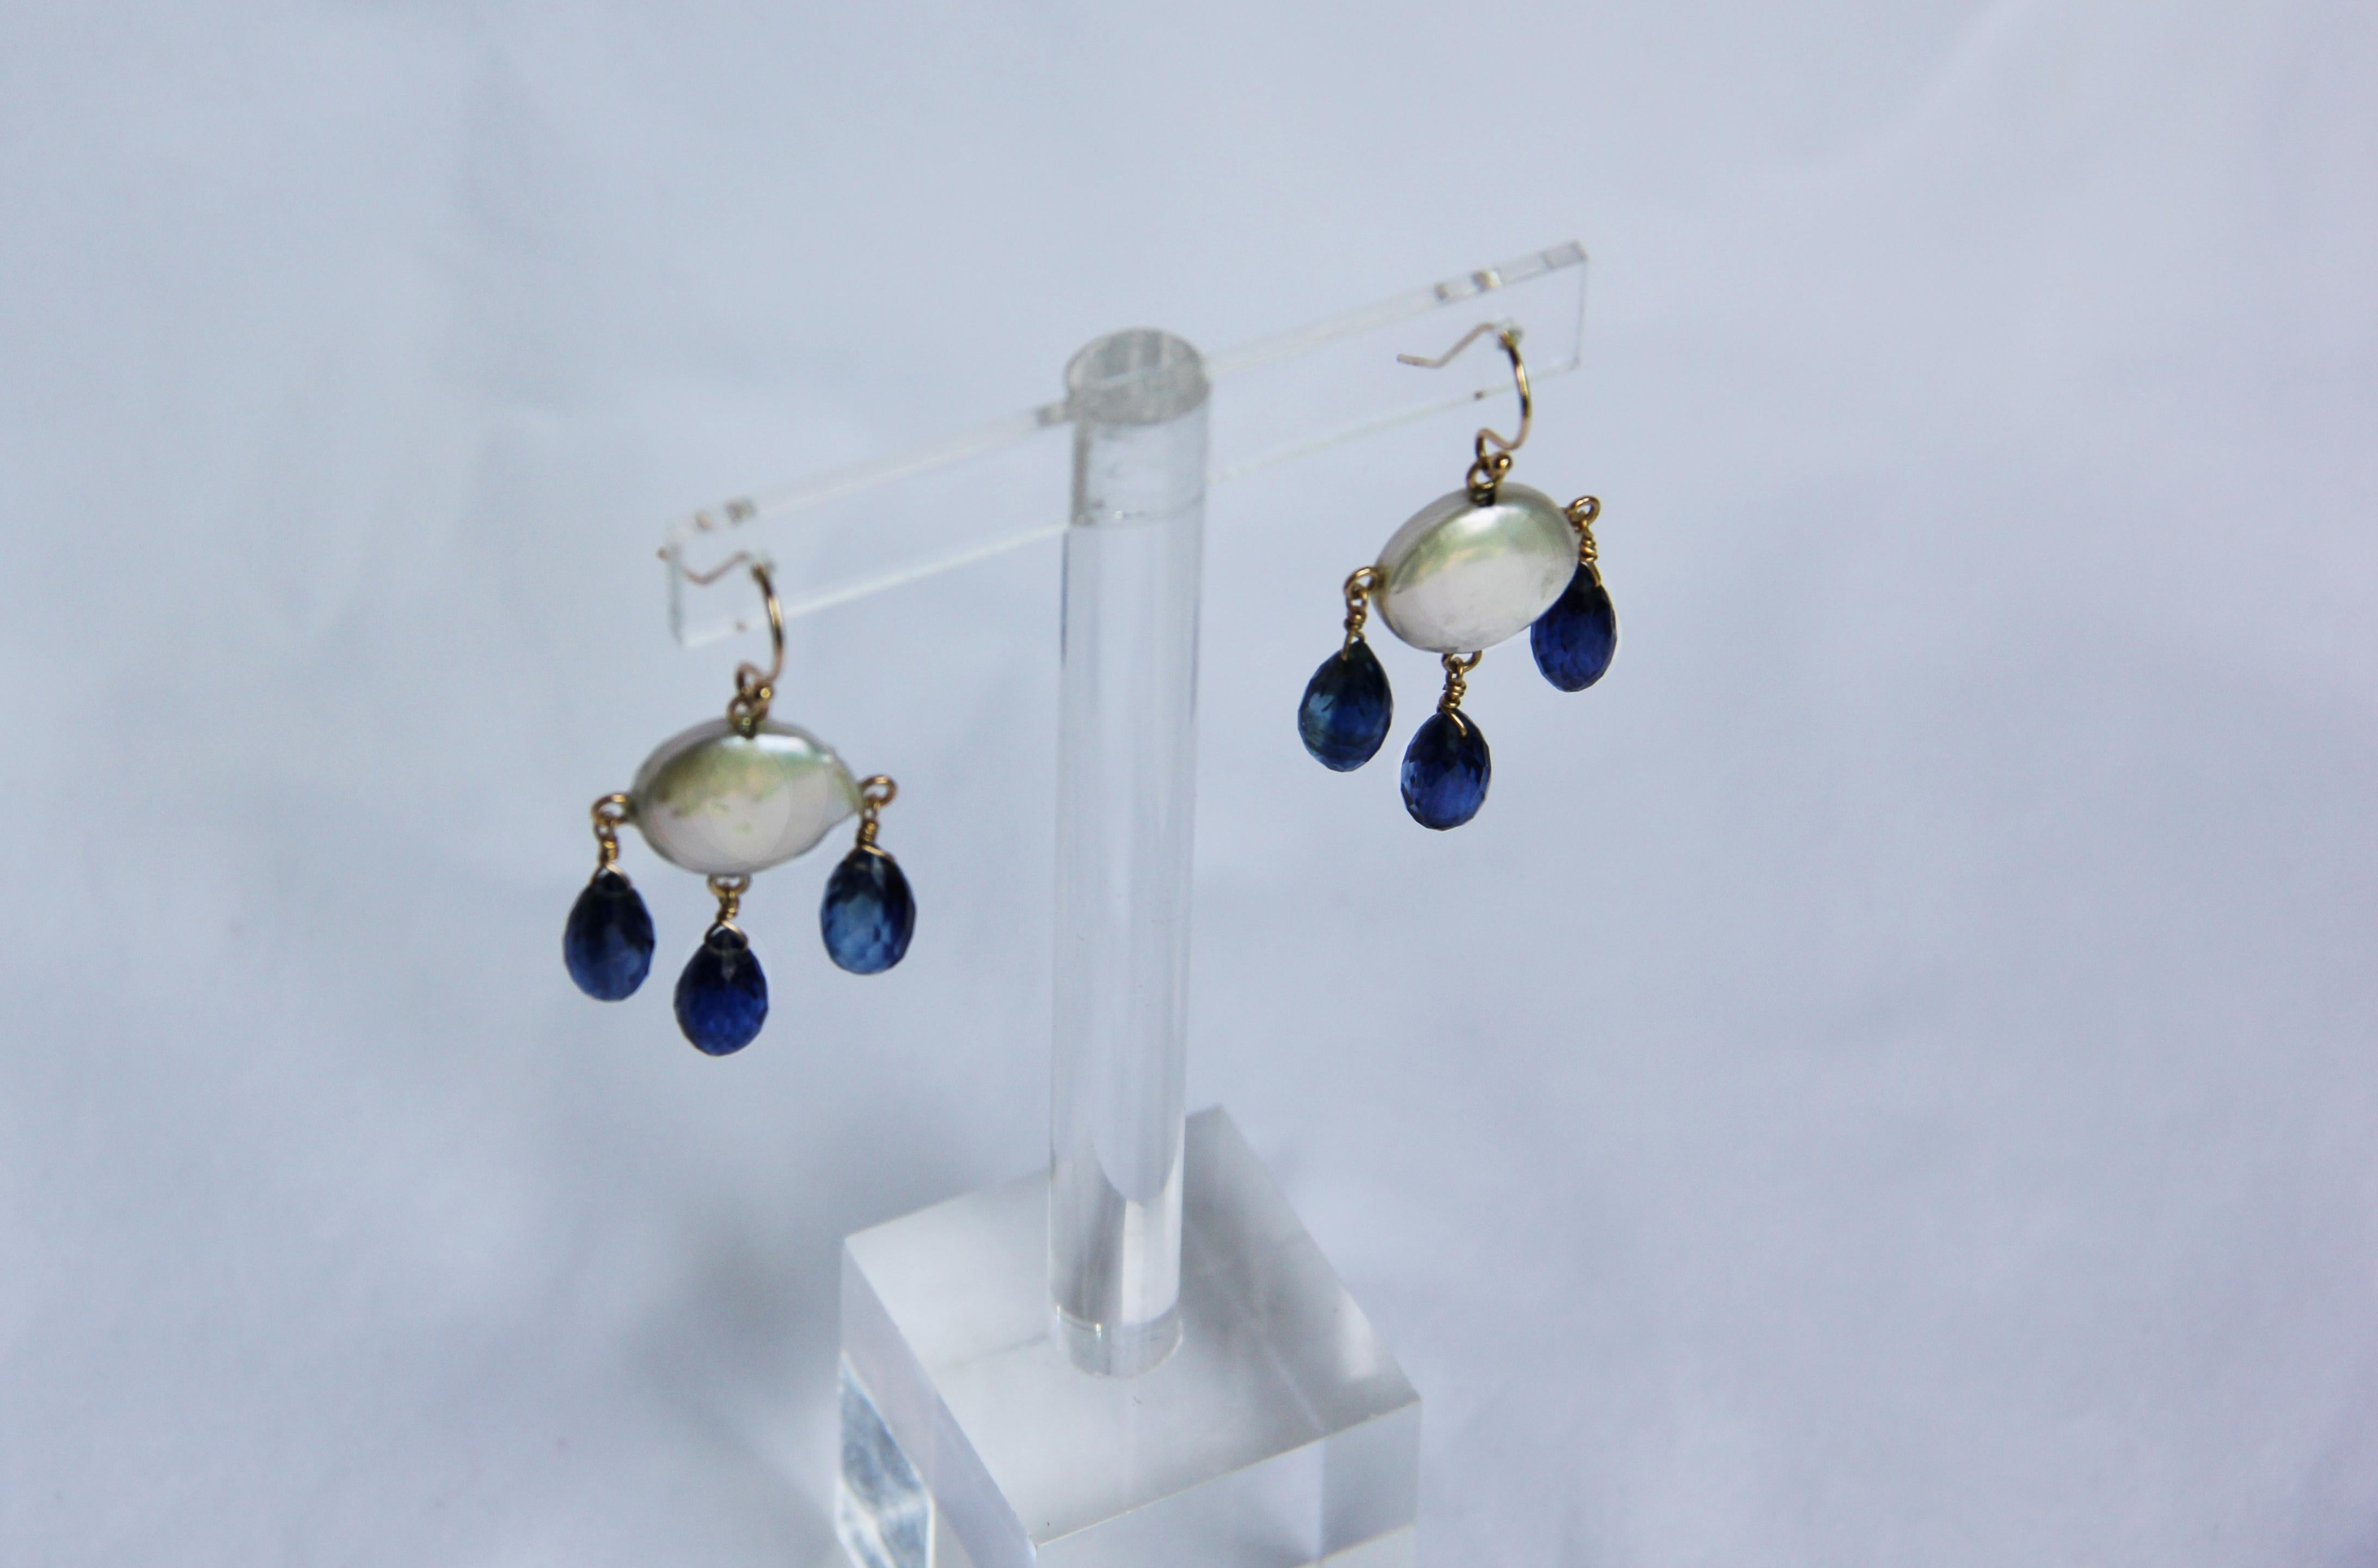 These white coin pearl and kyanite drop earrings with 14k yellow gold hook and findings are strikingly beautiful. The deep royal blue faceted kyanite drops harmoniously hang with a glowing white coin pearl. These earrings are held together with 14k